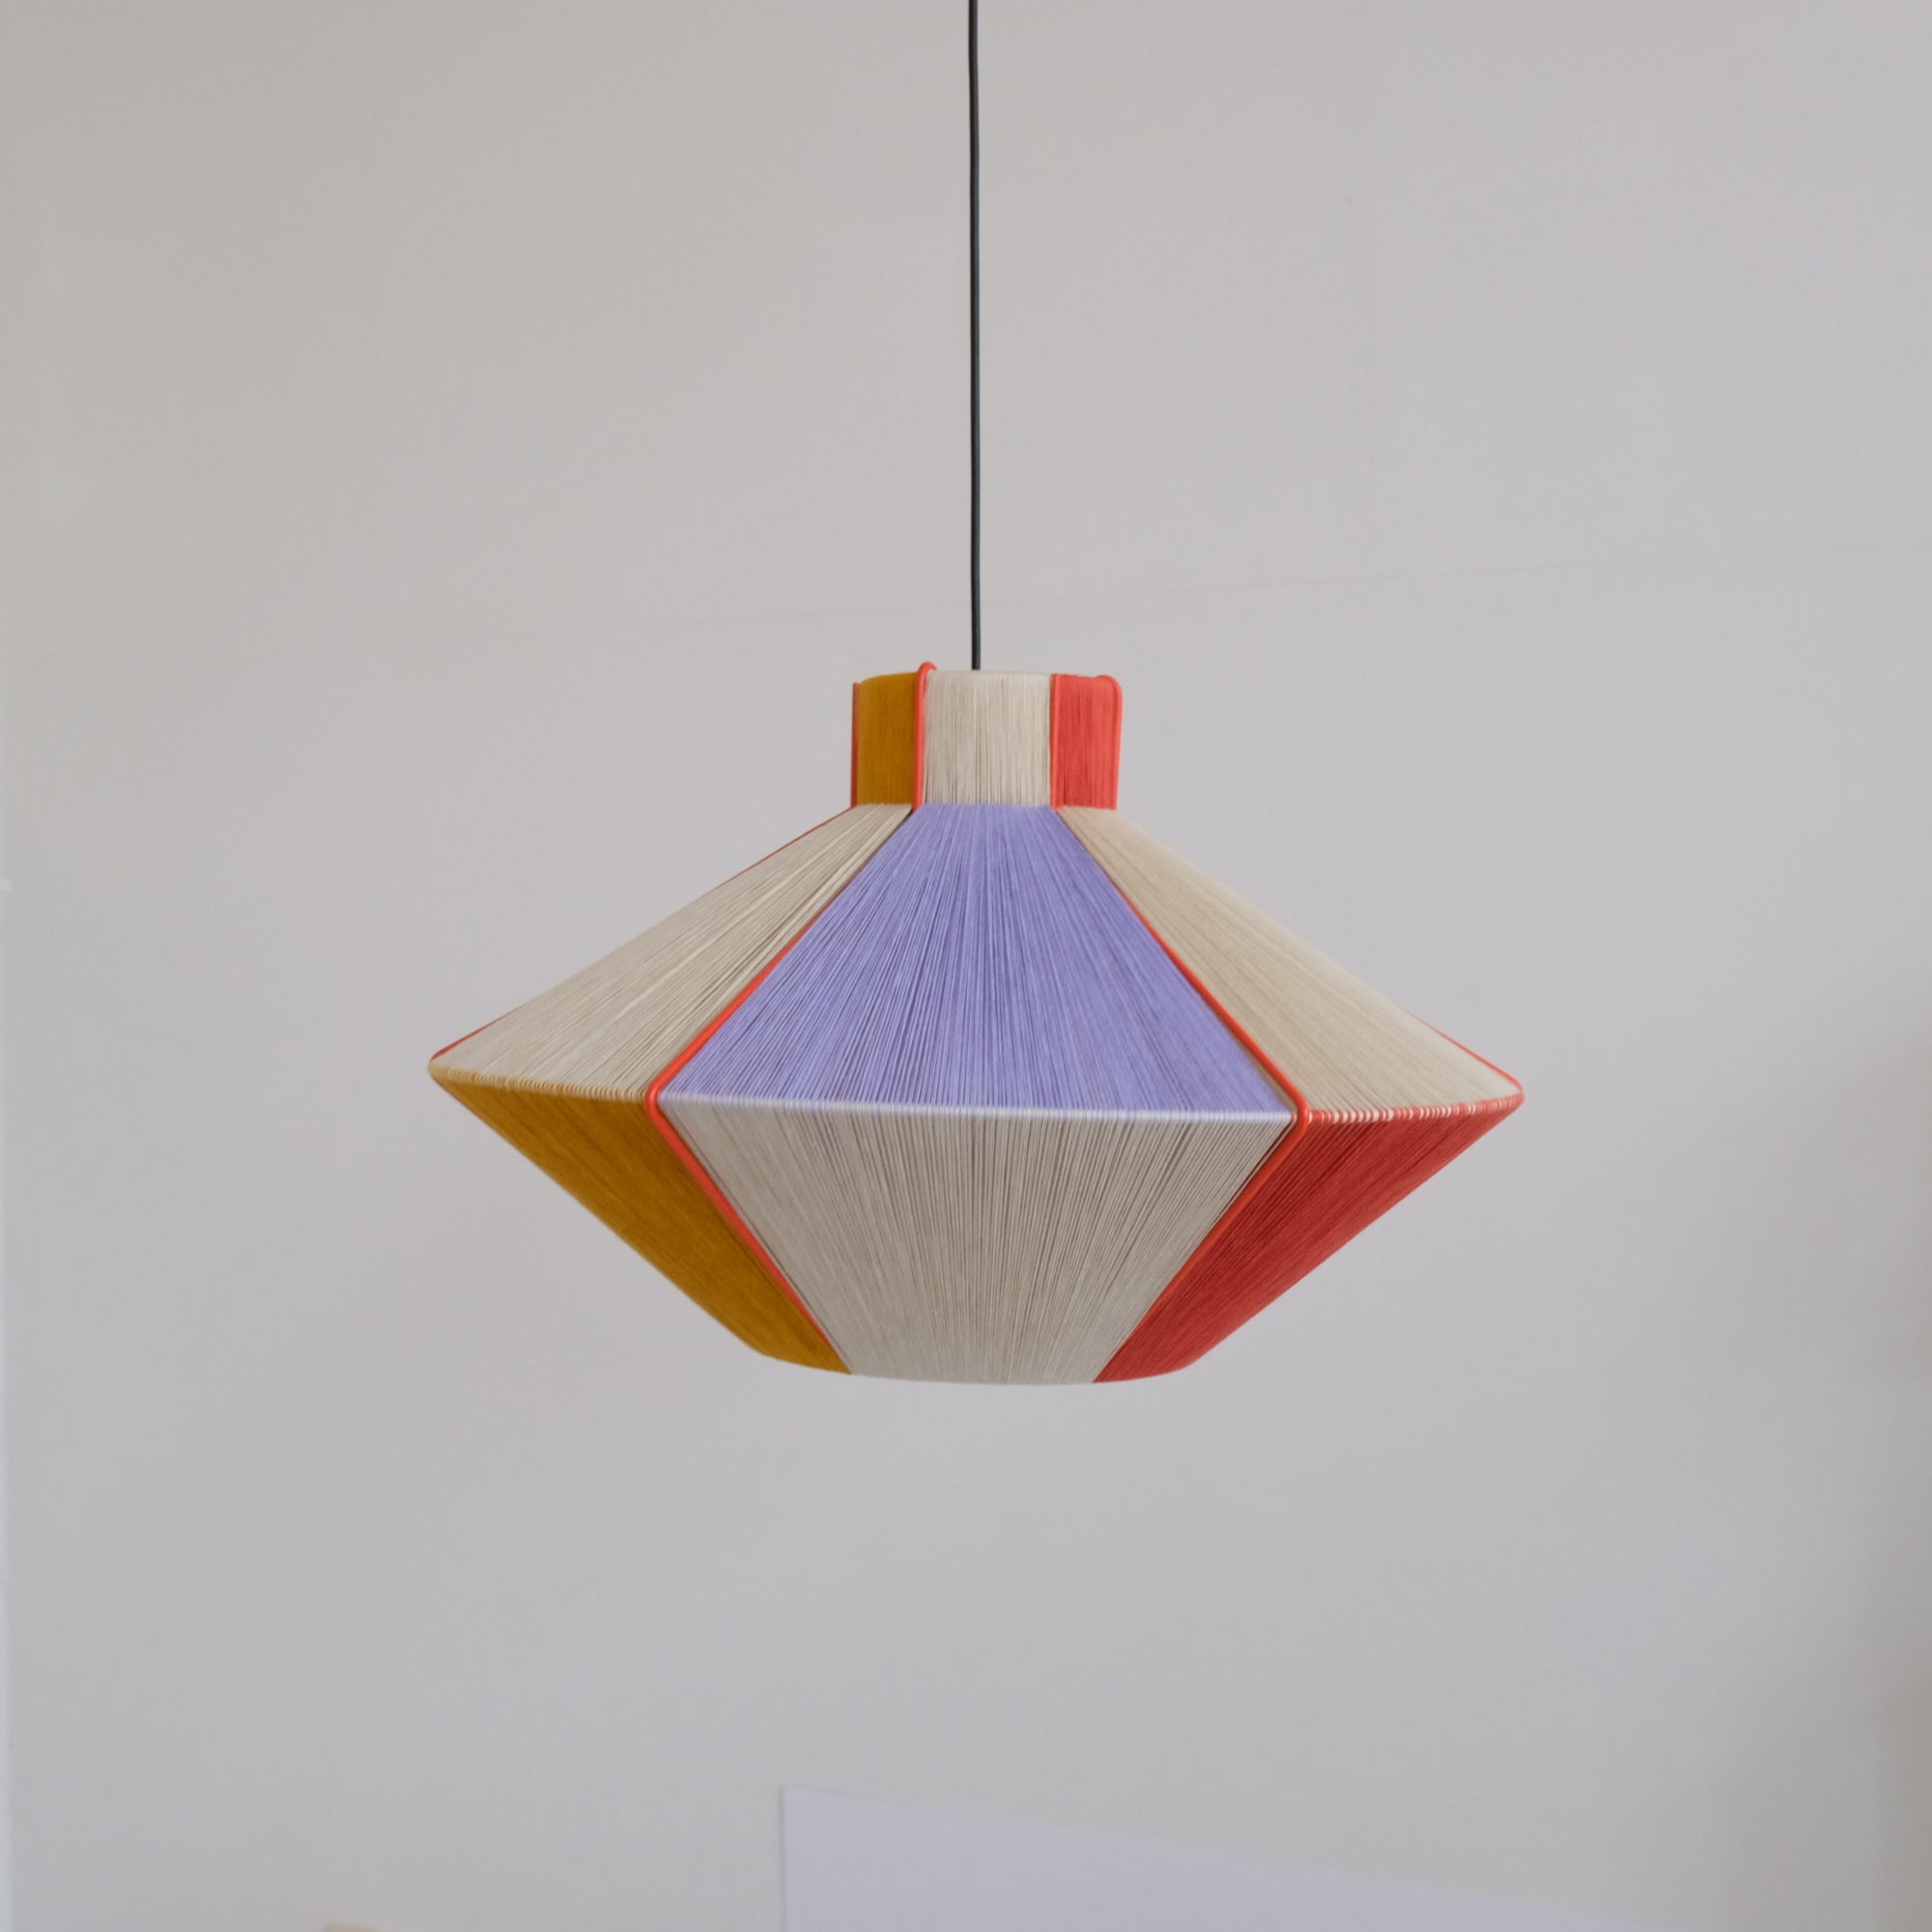 Each lamp is unique and completely handmade.

Their painted structural frames are produced by a local metal workshop, and Heymann hand-weaves these in her studio with Italian cotton thread.
She makes lamps in a variety of styles and sizes,